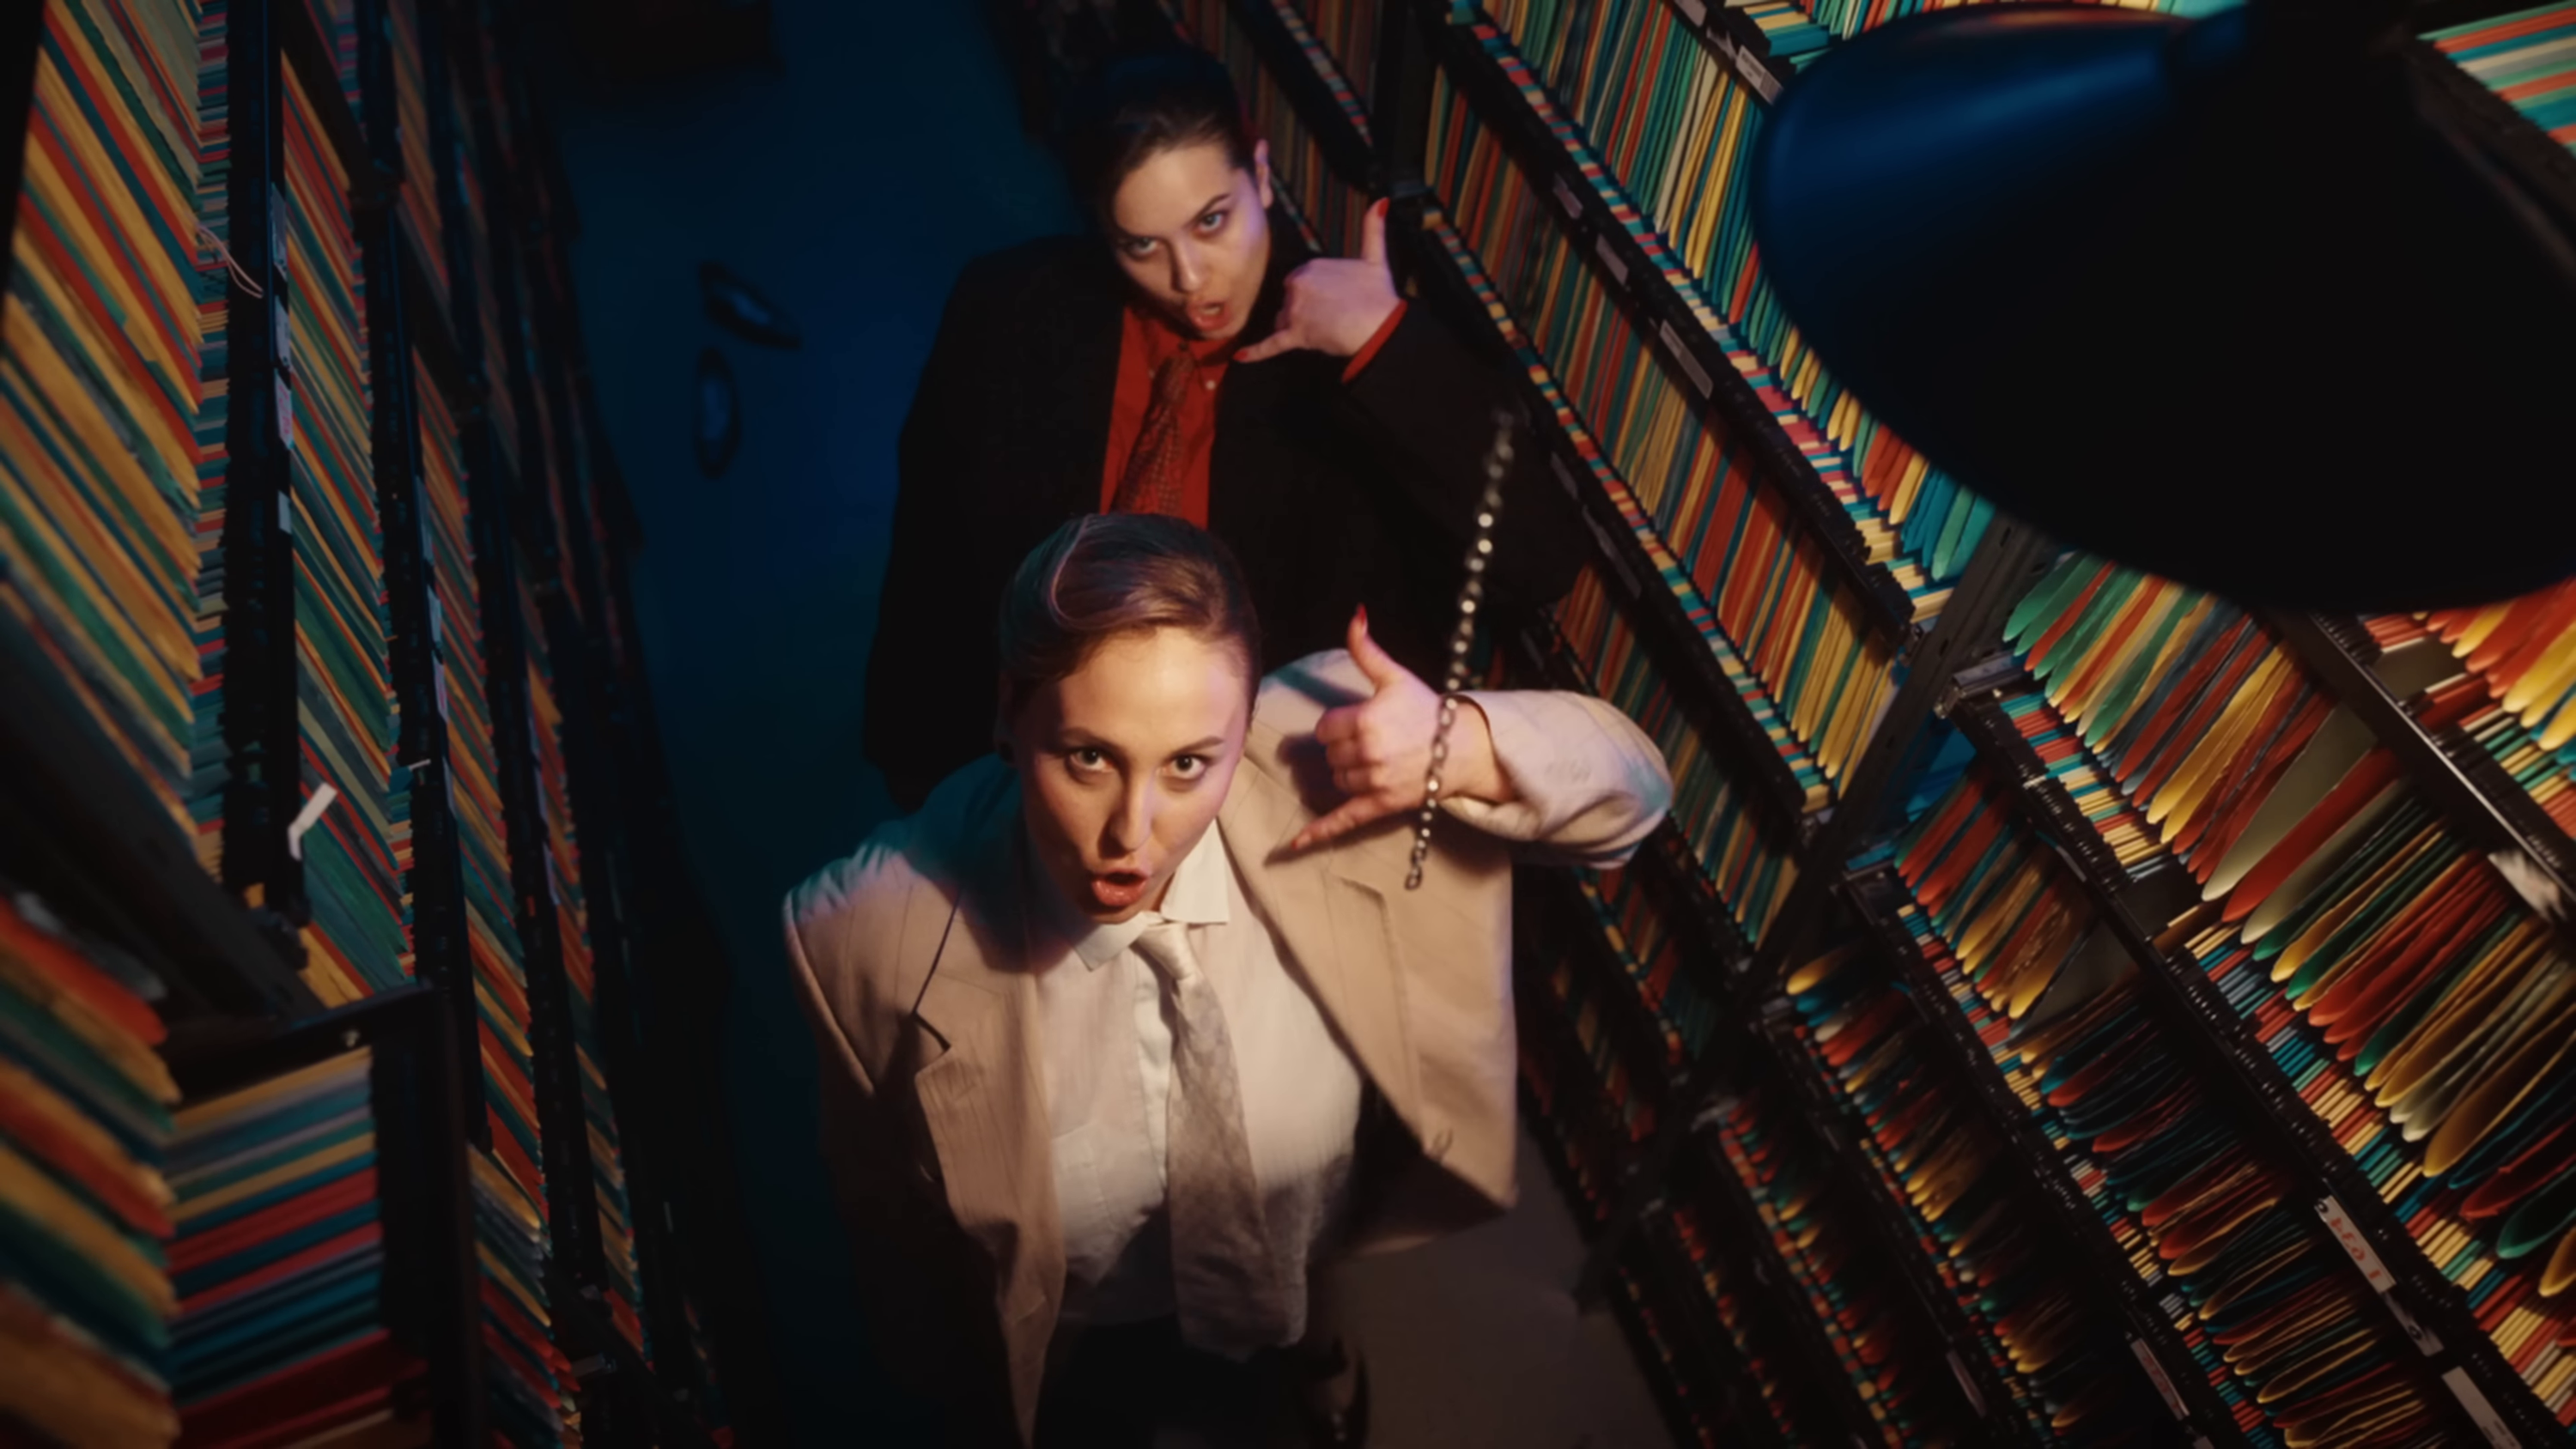 image of Teya and Salena wearing suits, surrounded by stacks of files